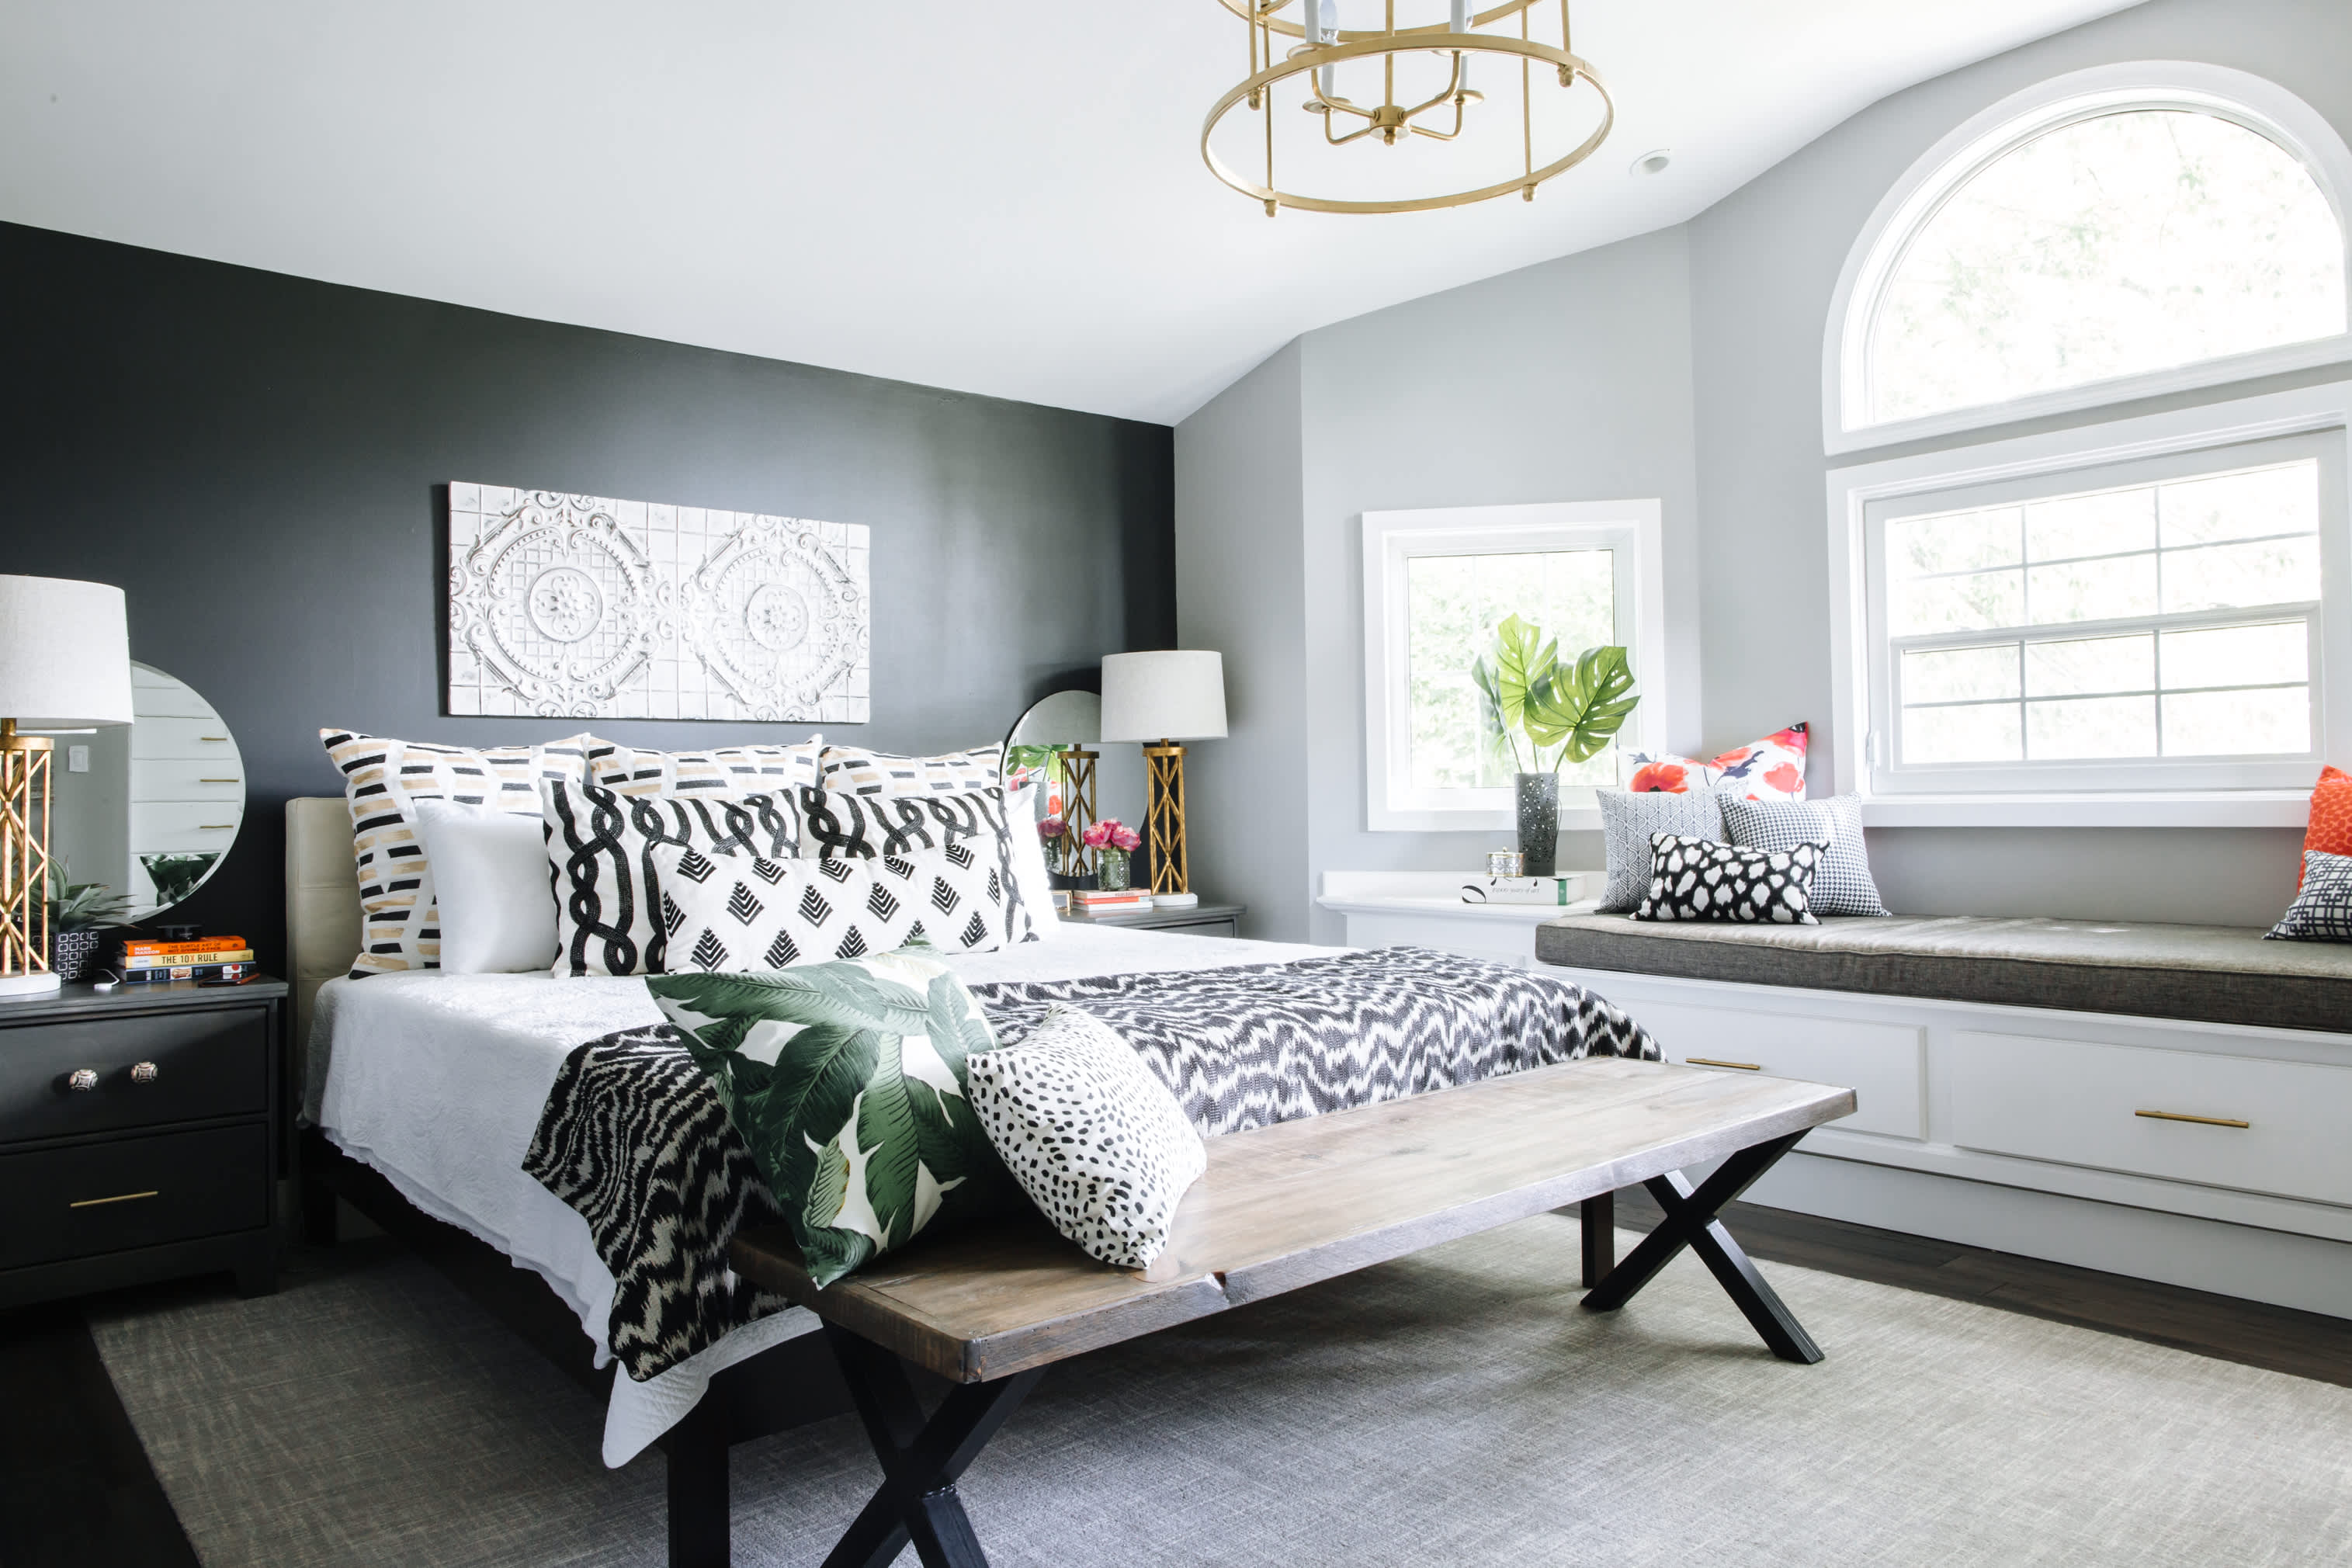 13 budget bedroom ideas to make your bedroom look expensive